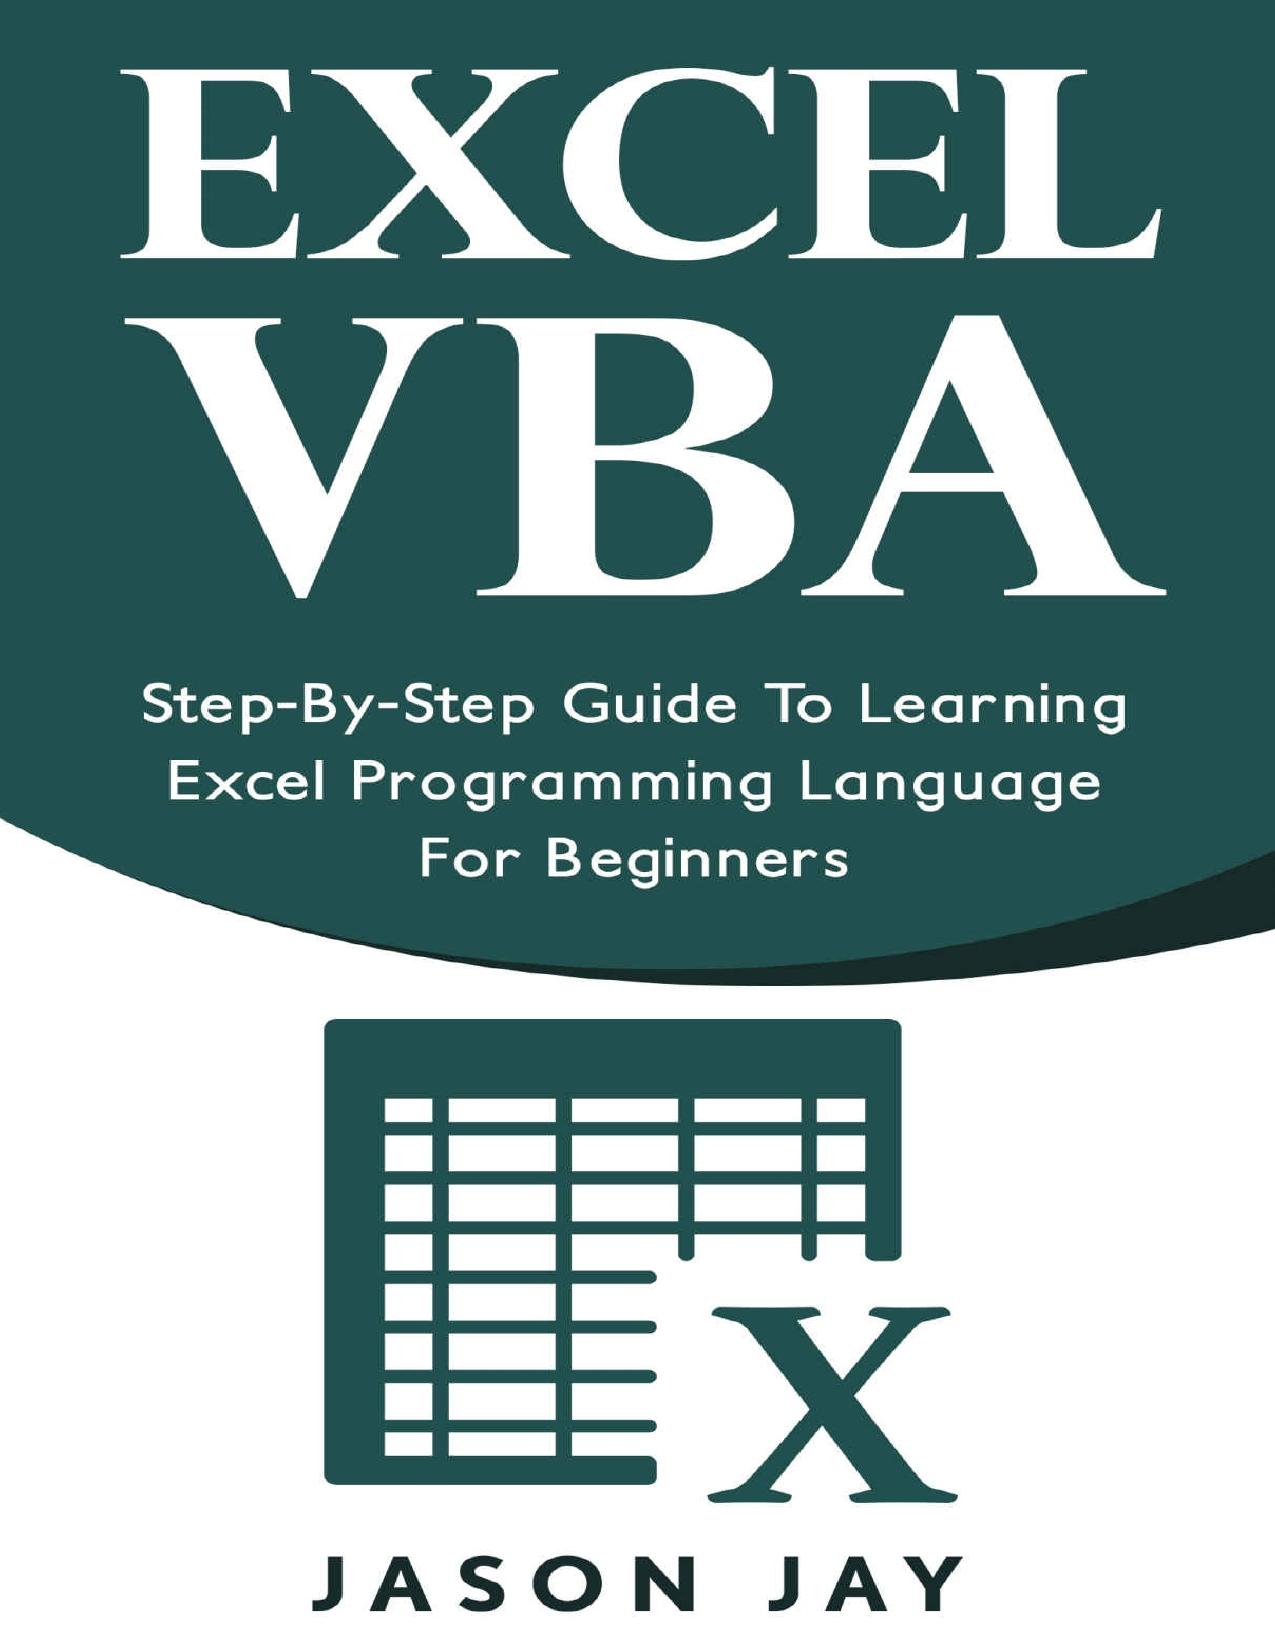 EXCEL VBA: Step-By-Step Guide To Learning Excel Programming Language For Beginners (Excel VBA programming, Excel VBA macro, Excel Visual Basic)